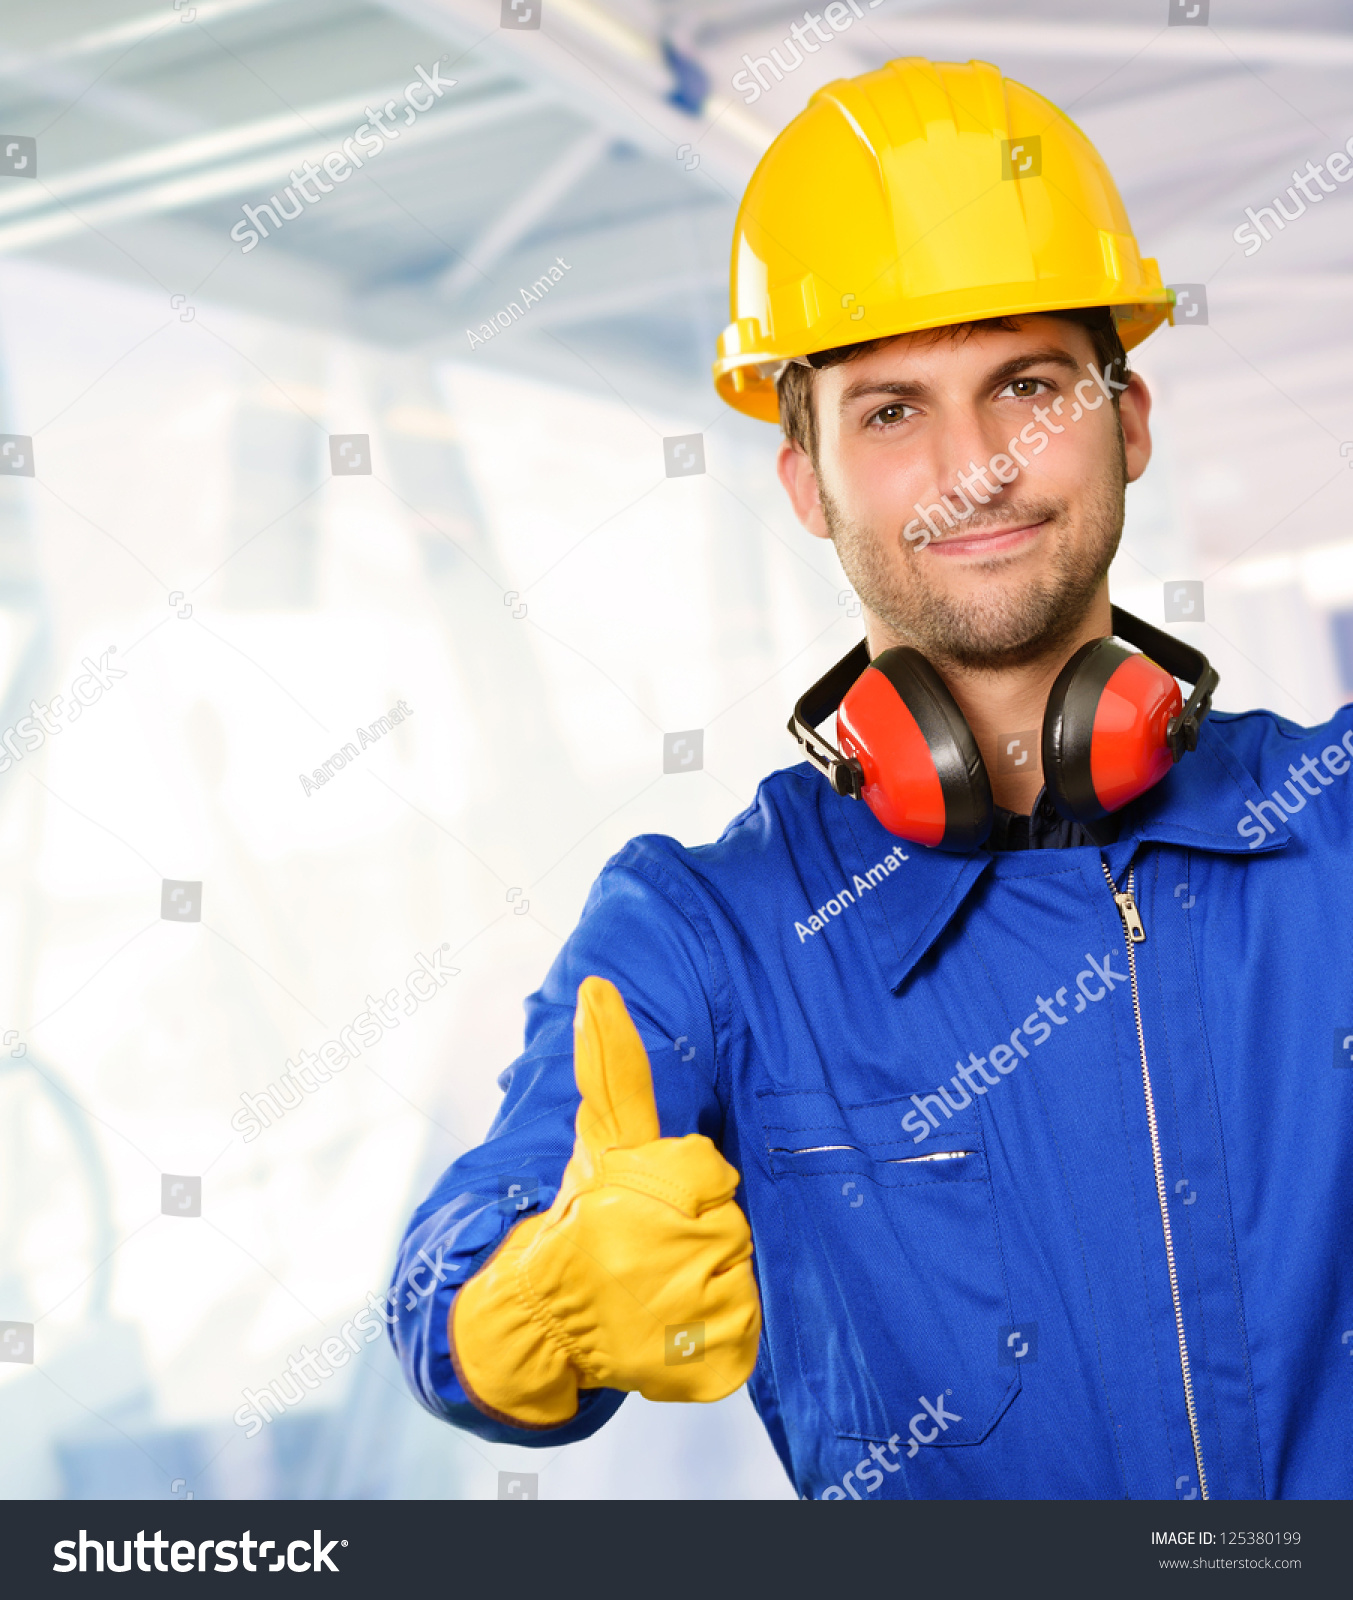 stock-photo-engineer-with-thumb-up-sign-indoors-125380199.jpg